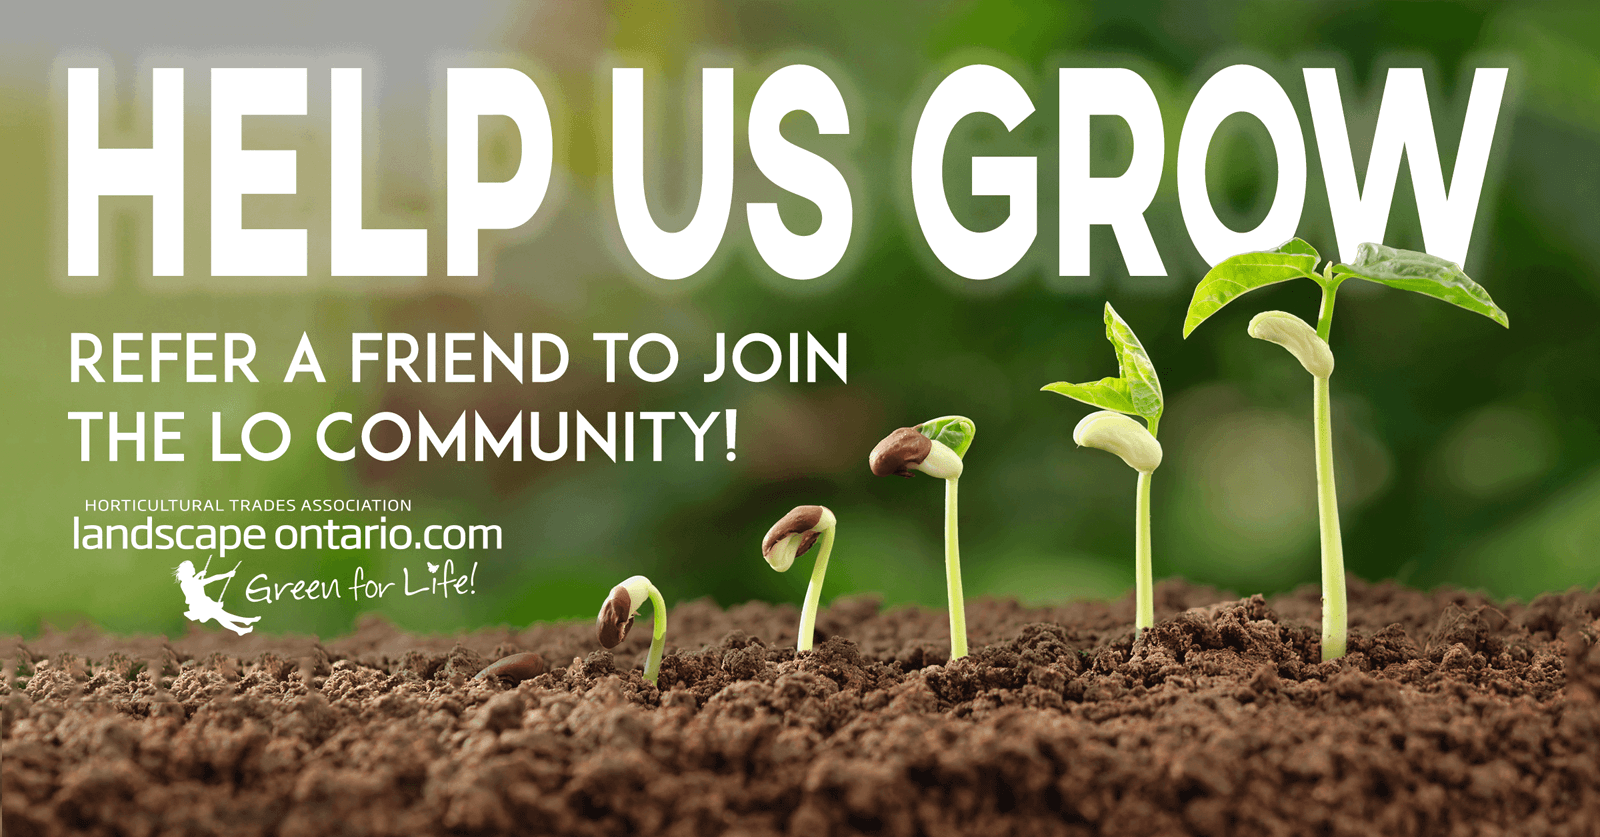 Refer a friend to join the LO community